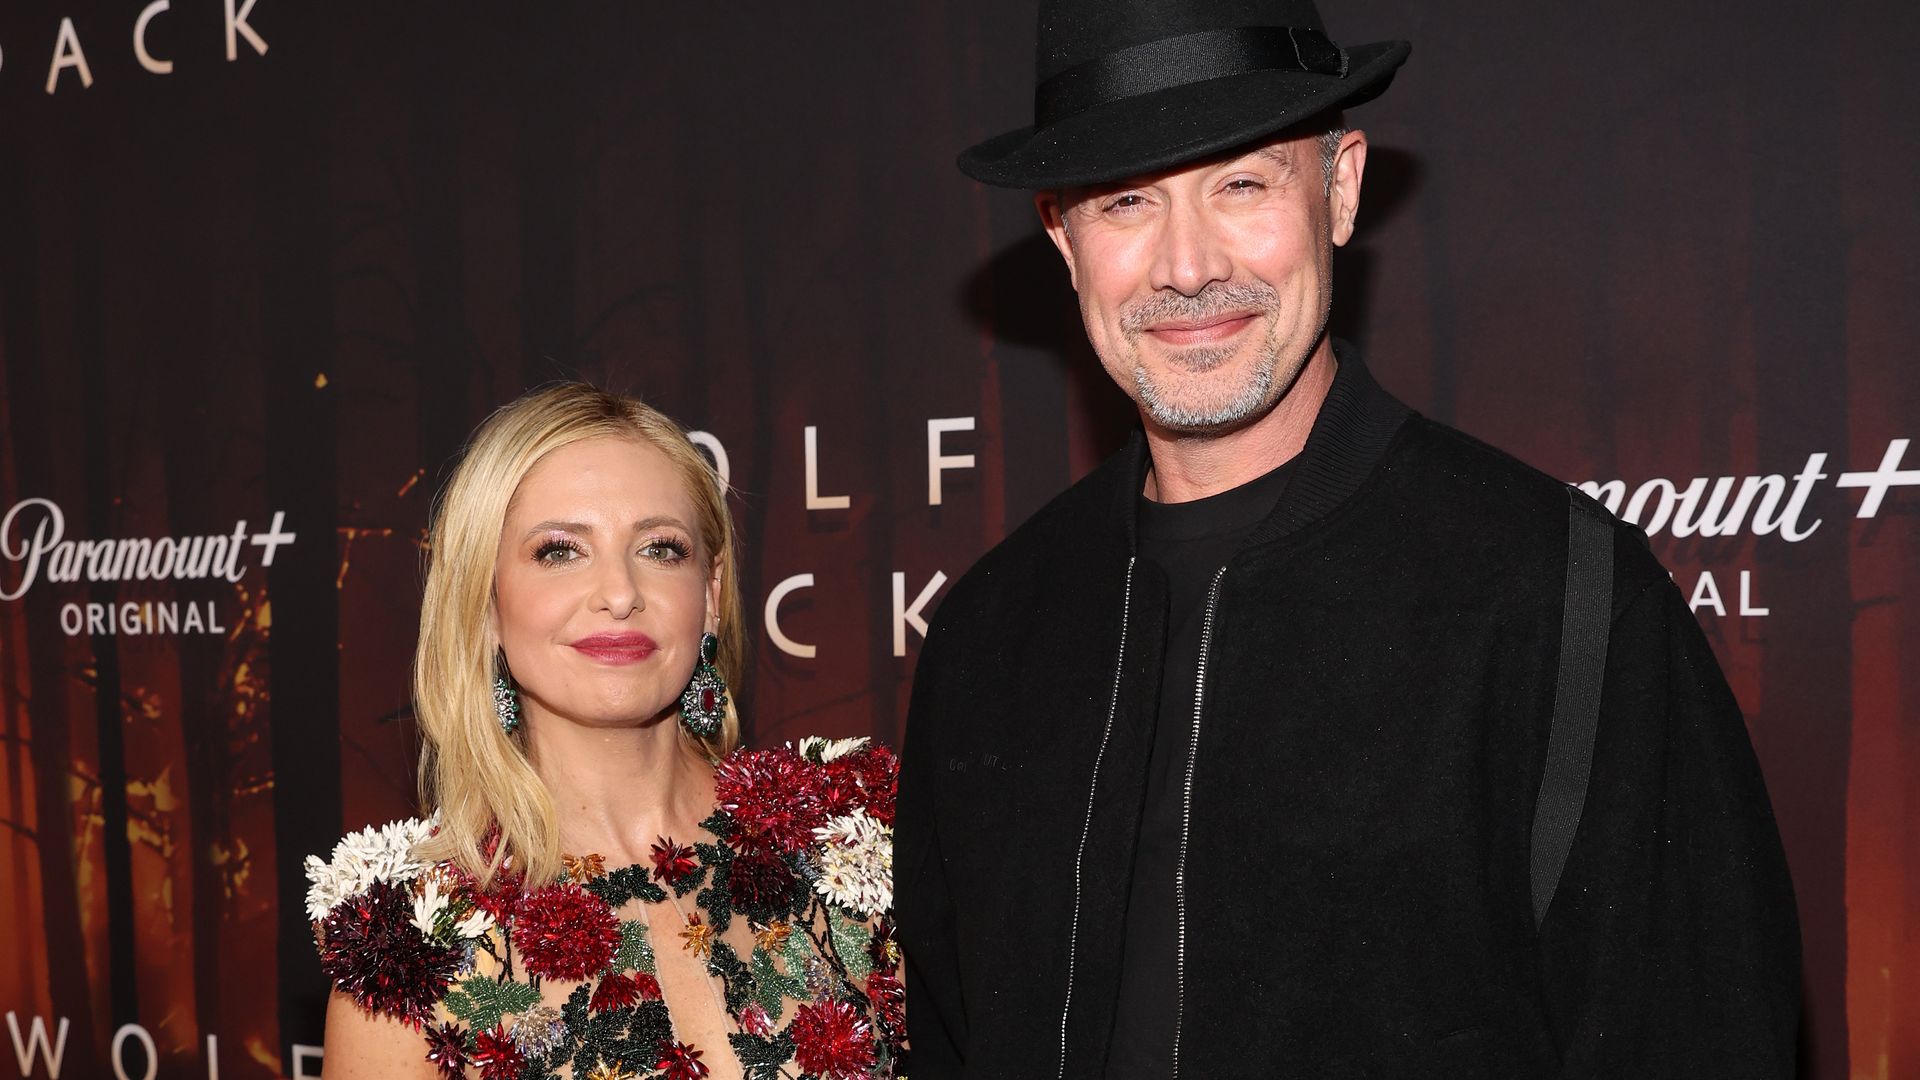 Sarah Michelle Gellar looks smitten for husband Freddie in 'not easy to get' photo together